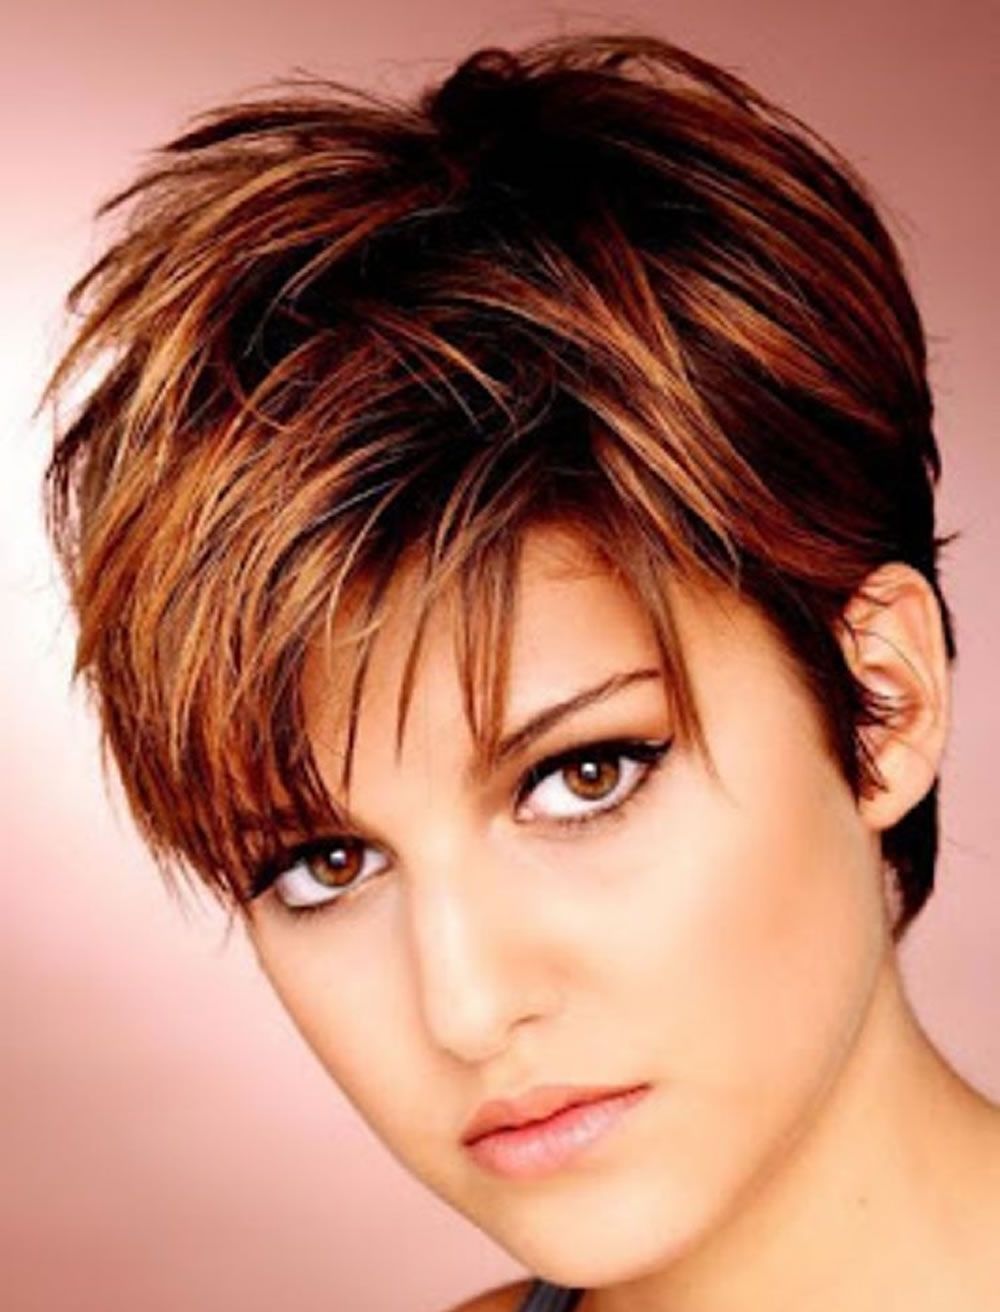 Haircuts For Round Face Thin Hair Ideas For 2018 Intended For Most Recently Pixie Hairstyles Styles For Thin Hair (View 12 of 15)